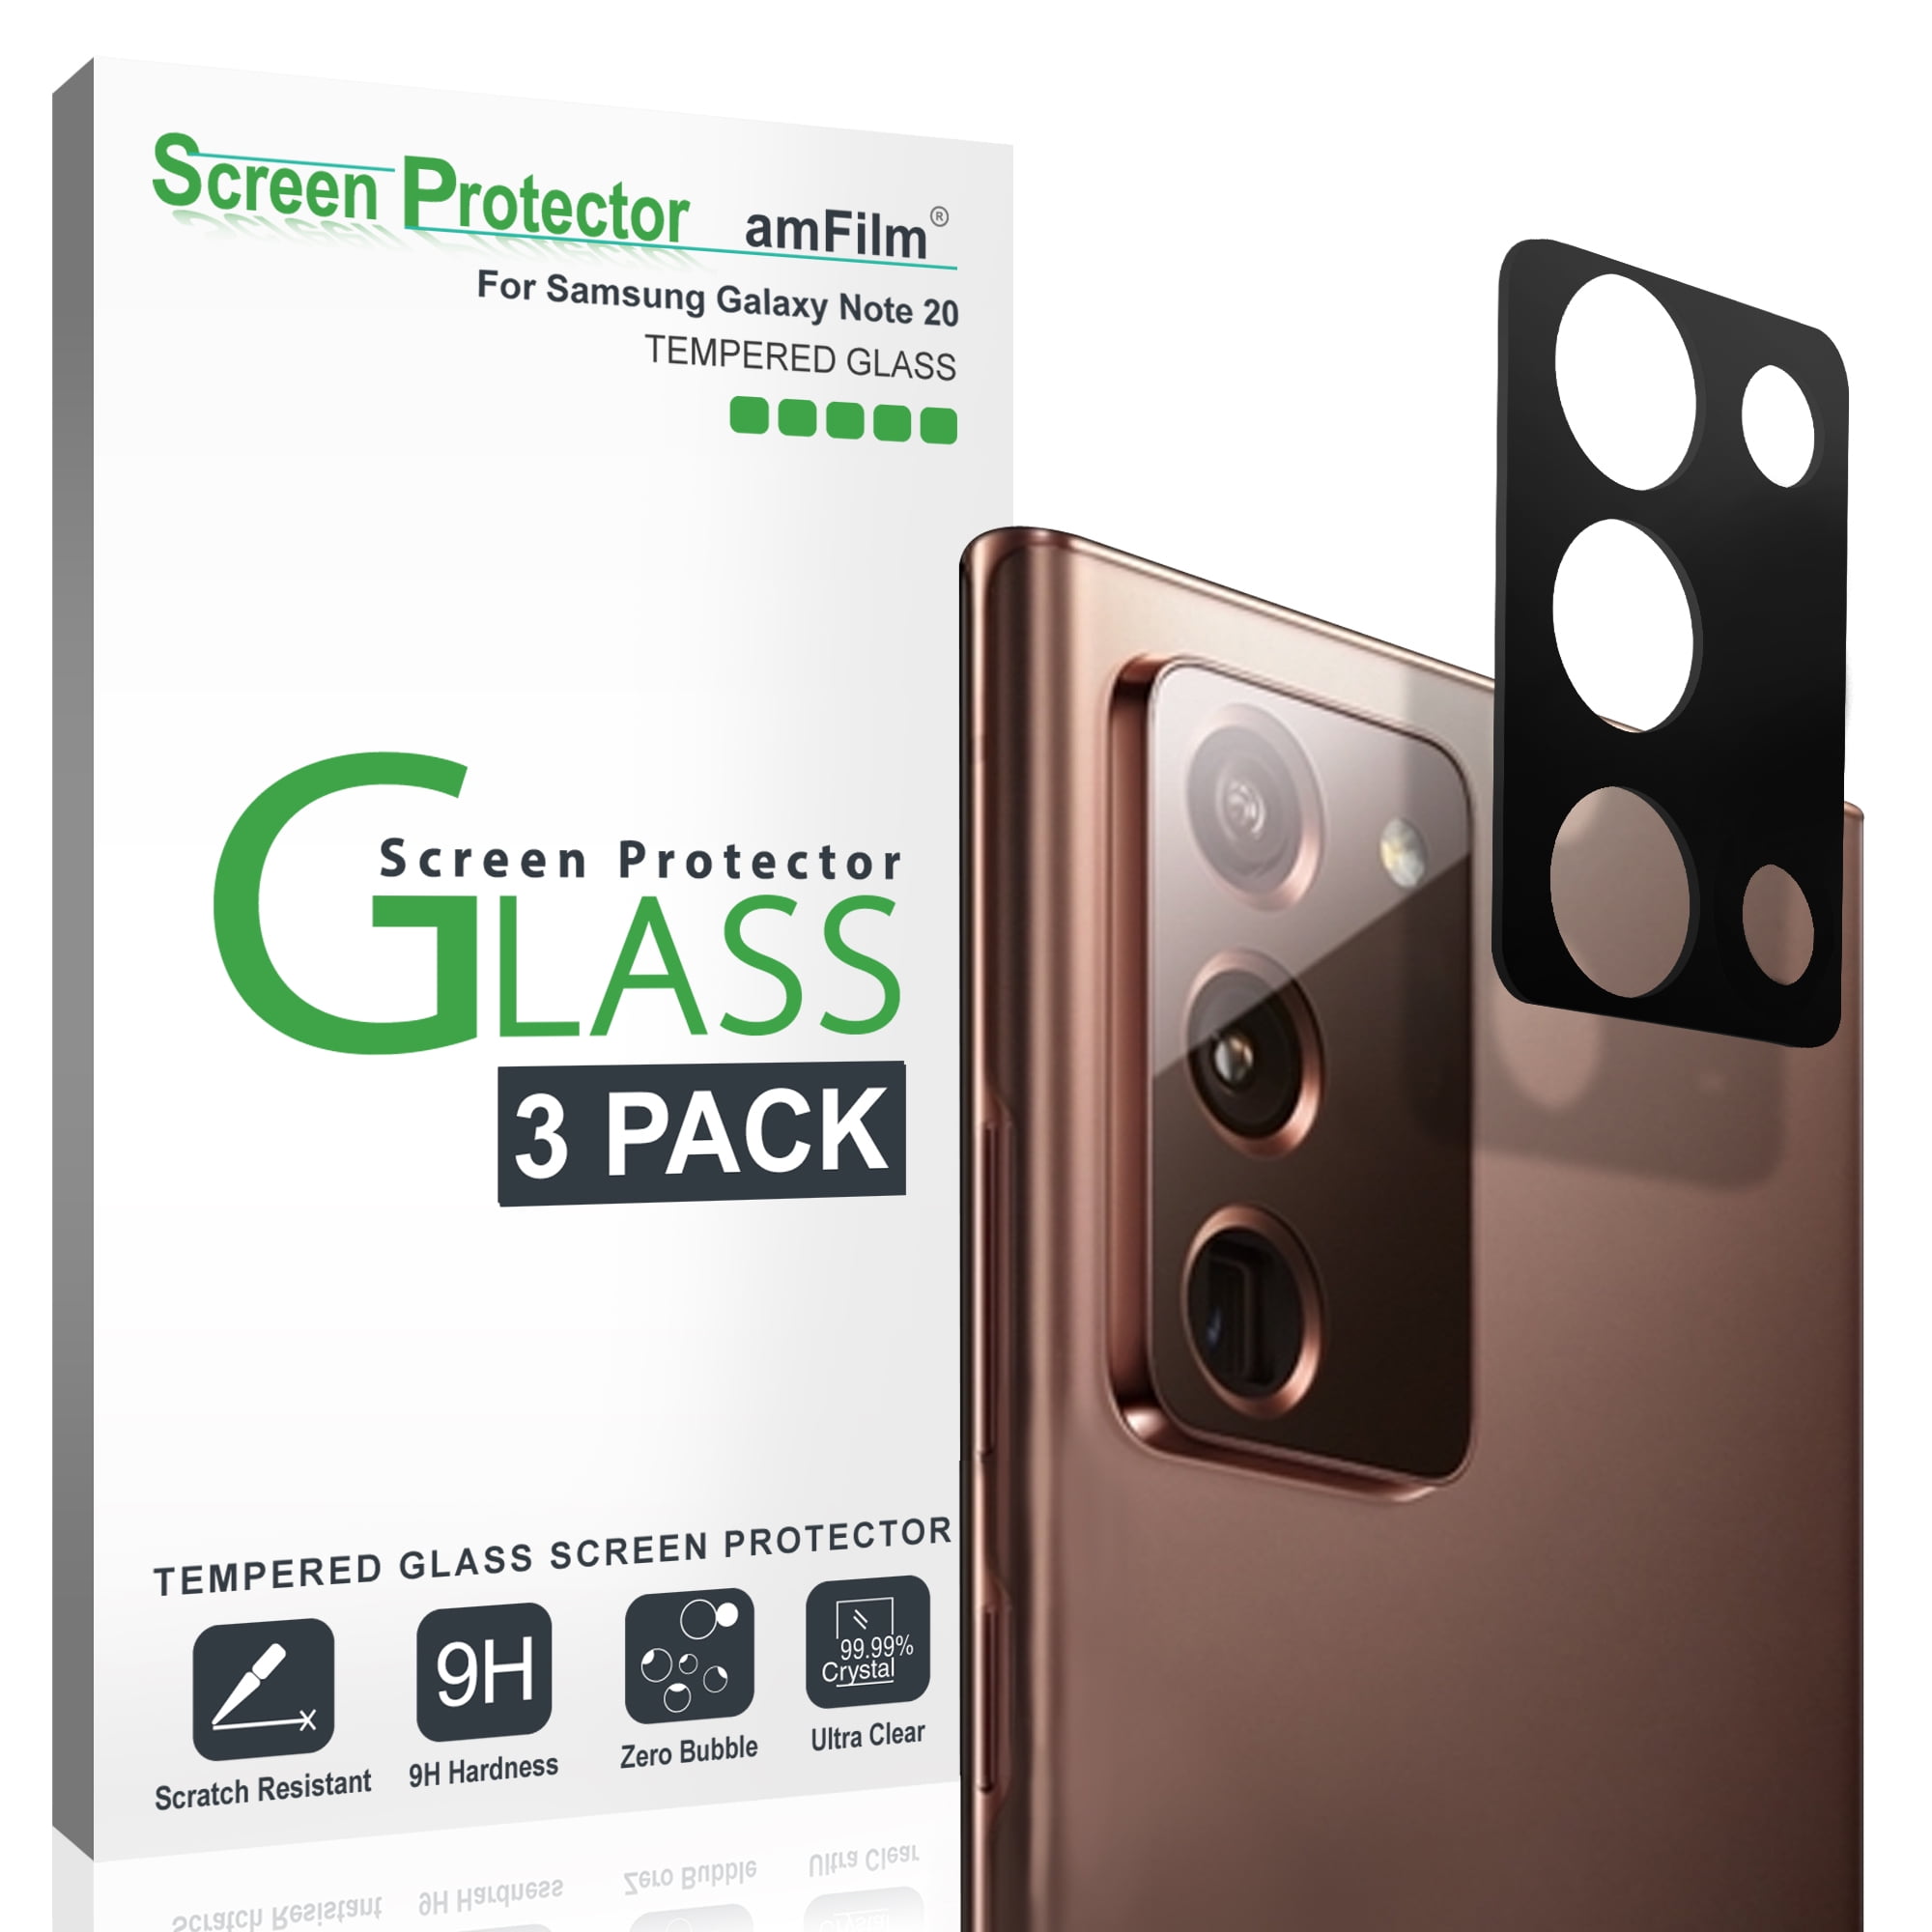 4 Pack 2 Pack Tempered Glass Camera Lens Protector,9H Hardness,Full Coverage,Anti-Fingerprint for Galaxy Note 20 Galaxy Note 20 Screen Protector Include 2 Pack Tempered Glass Screen Protector 